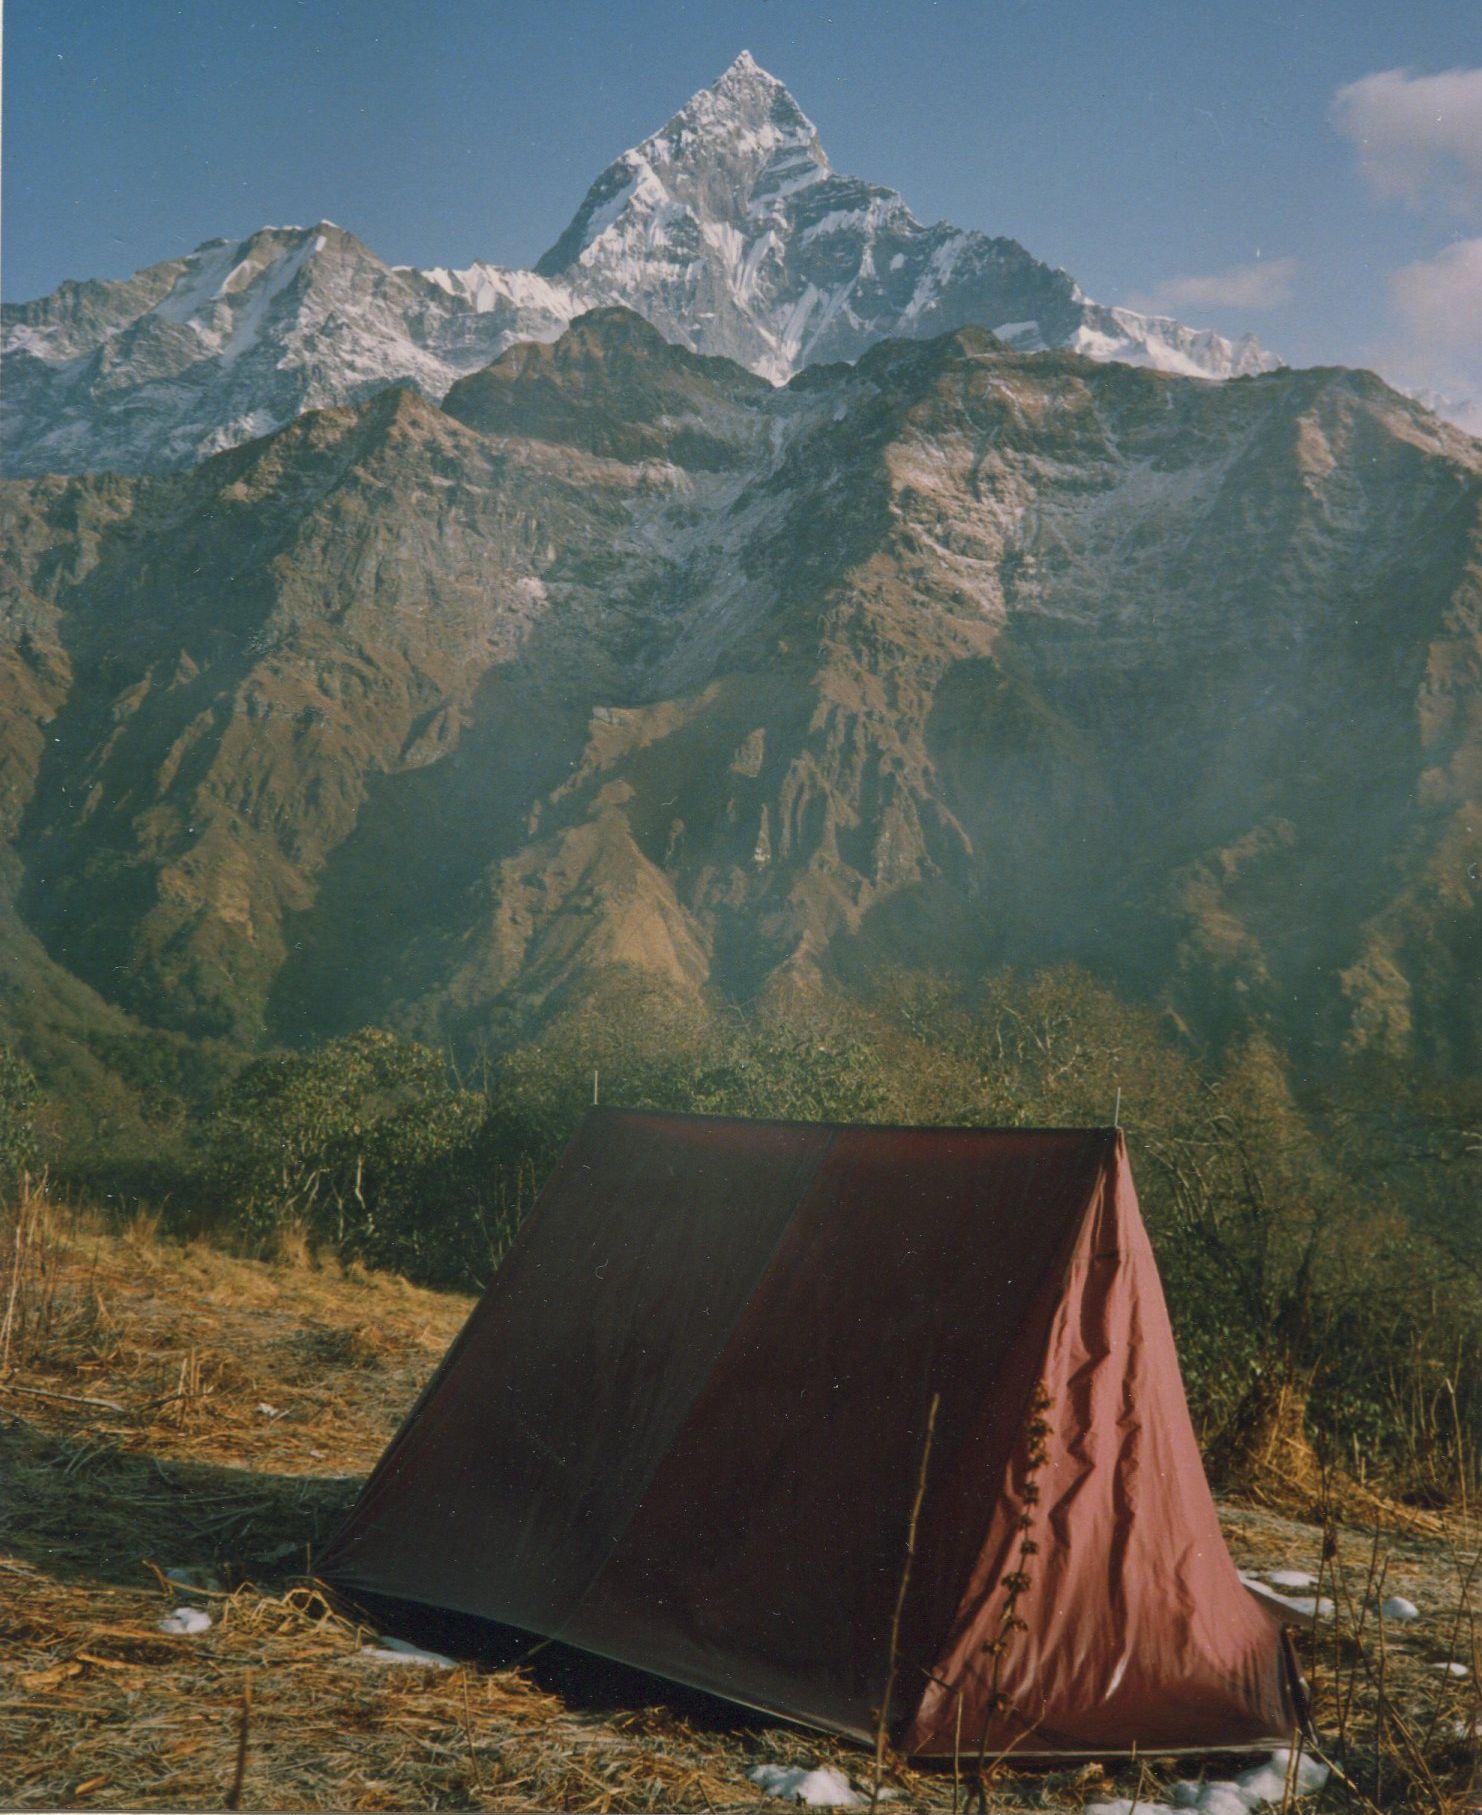 Macchapucchre ( Fishtail Mountain ) and Mardi Himal from Korchon